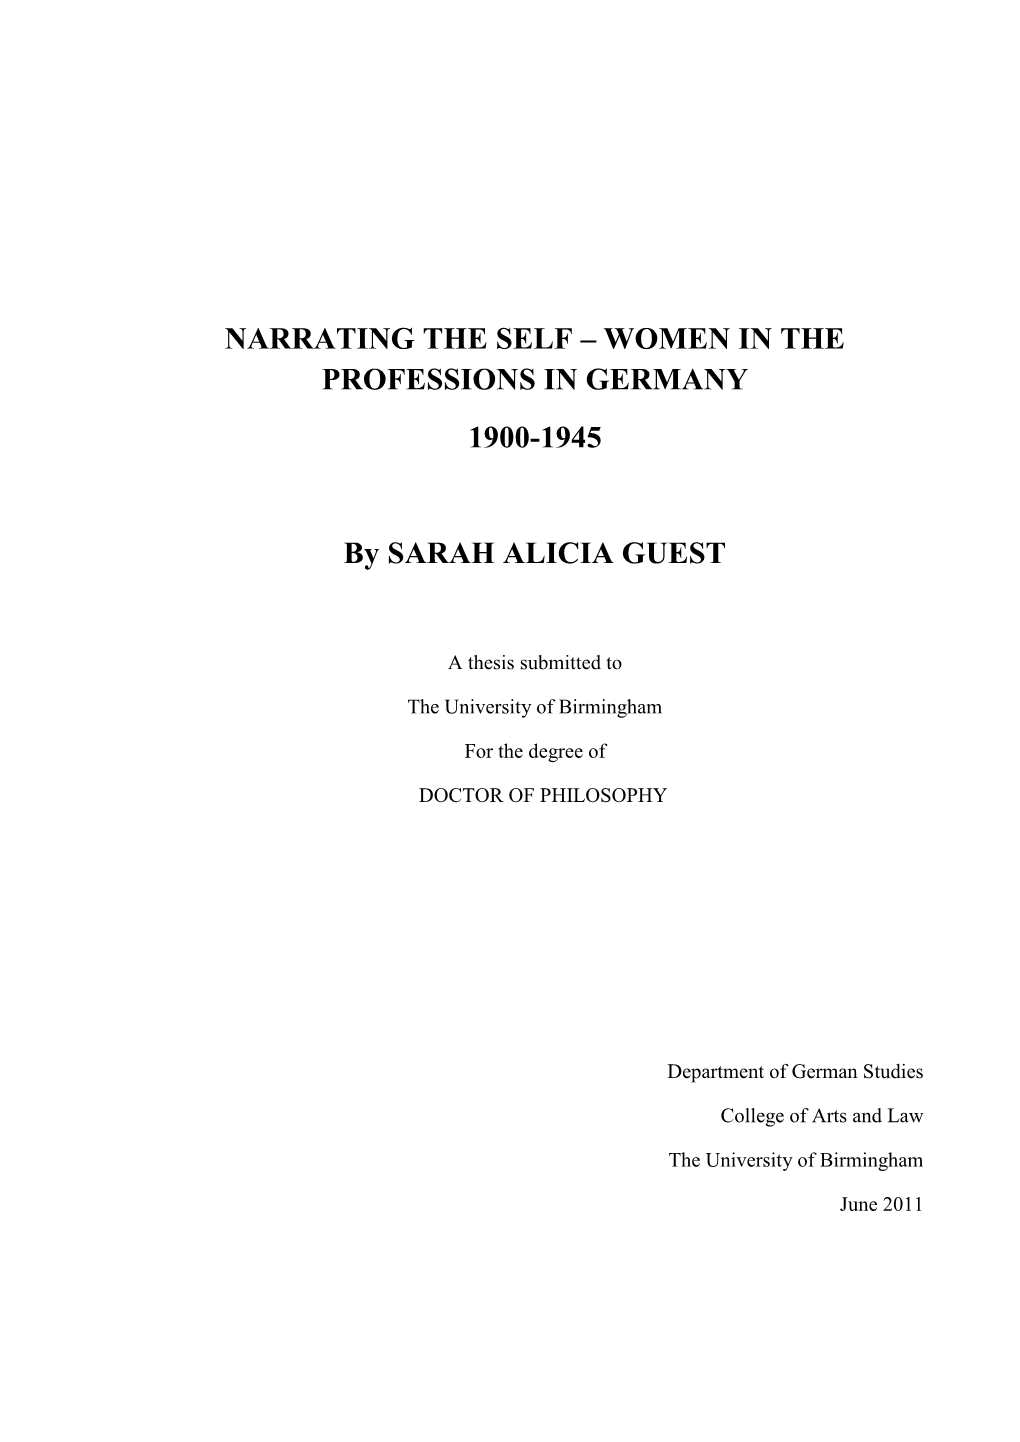 Women in the Professions in Germany 1900-1945